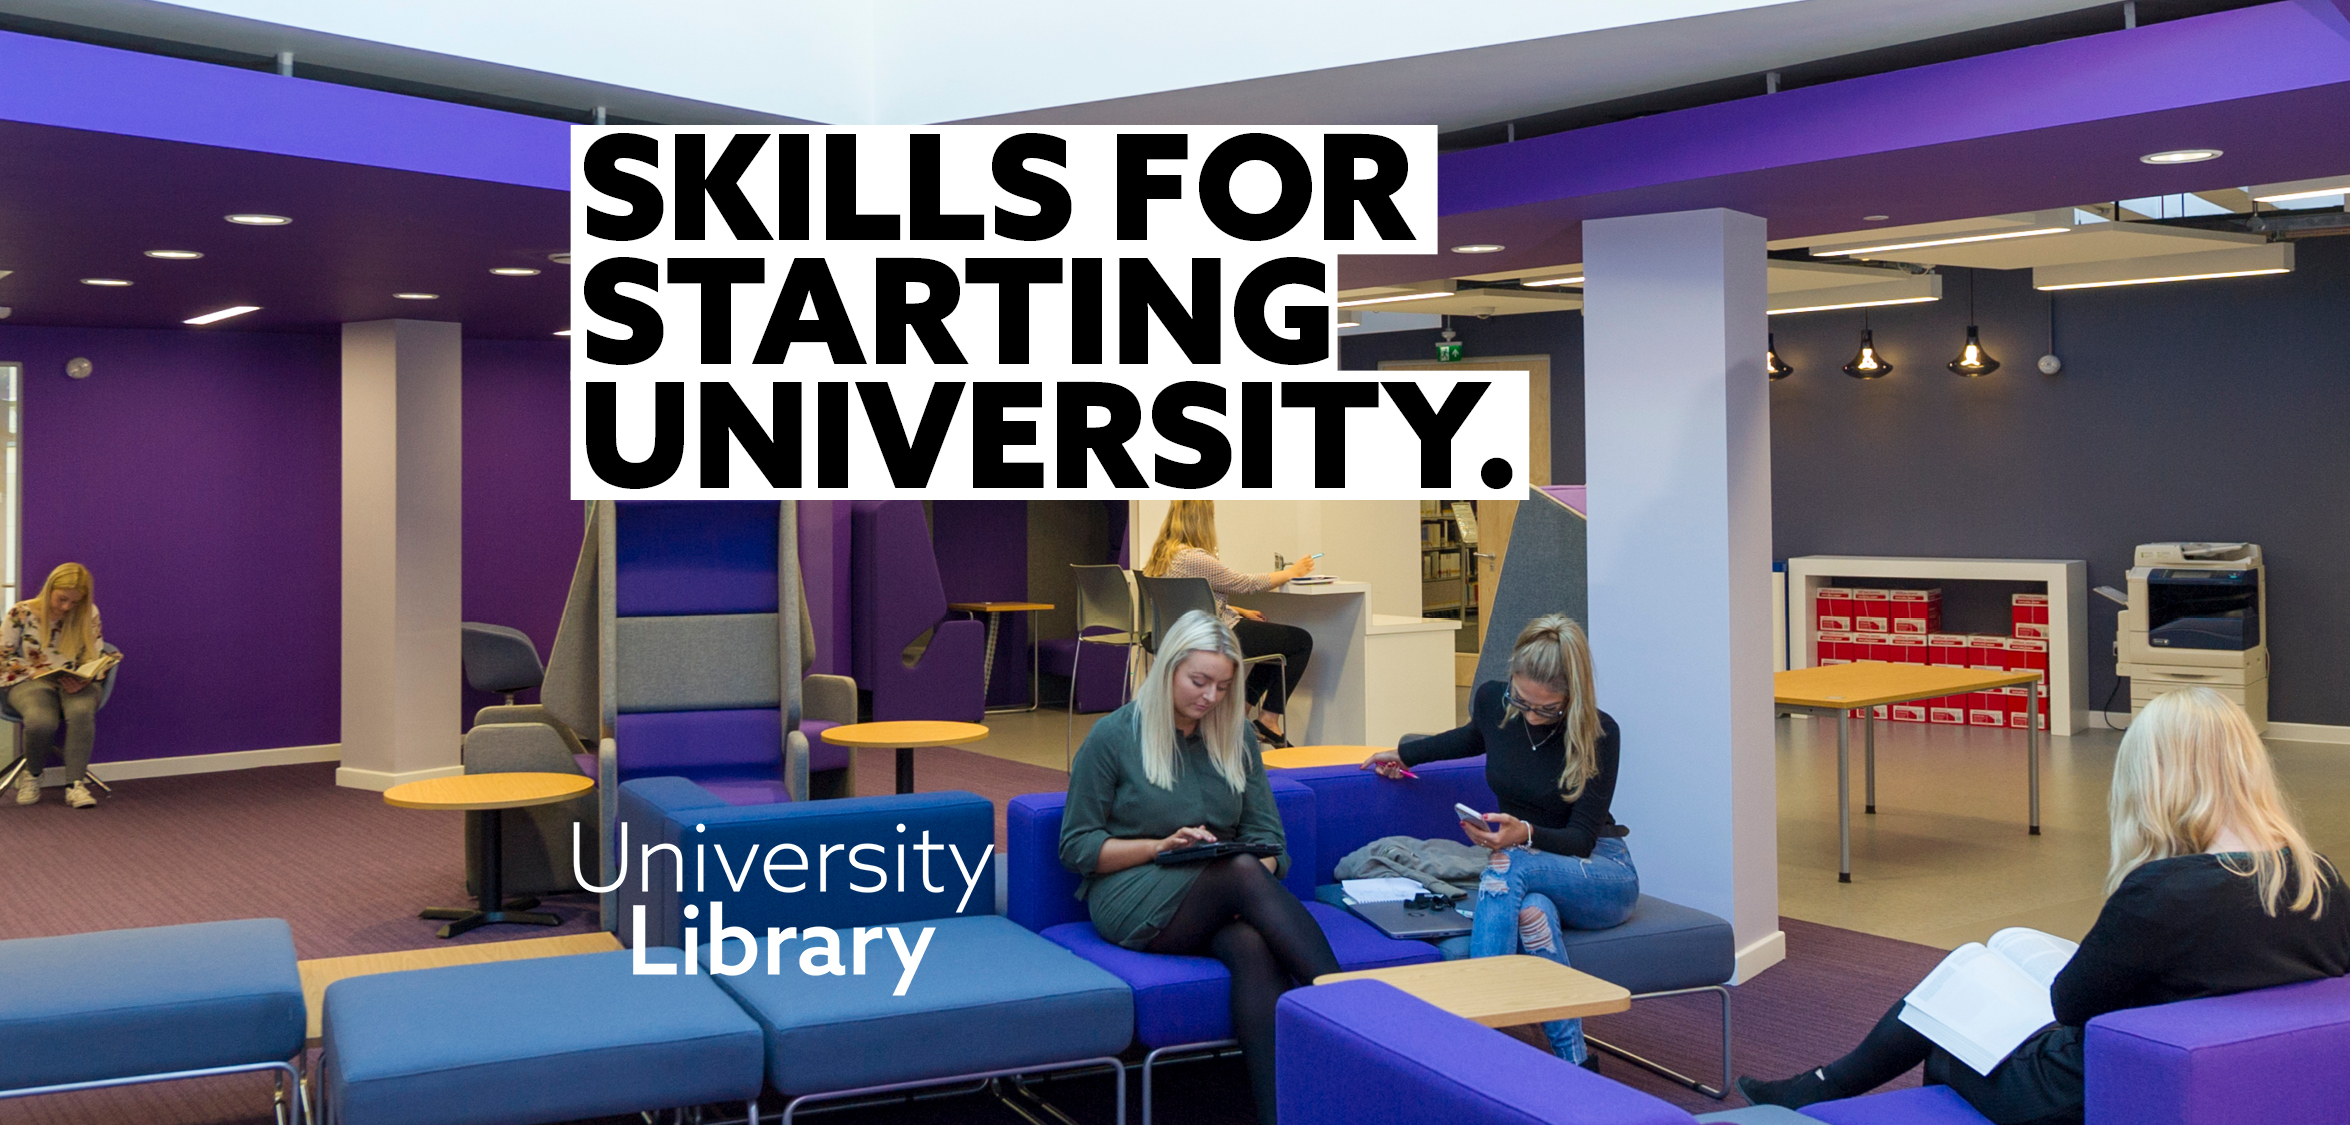 3 girls sitting on blue sofas studying in a library environment with a text box saying, skills for starting university